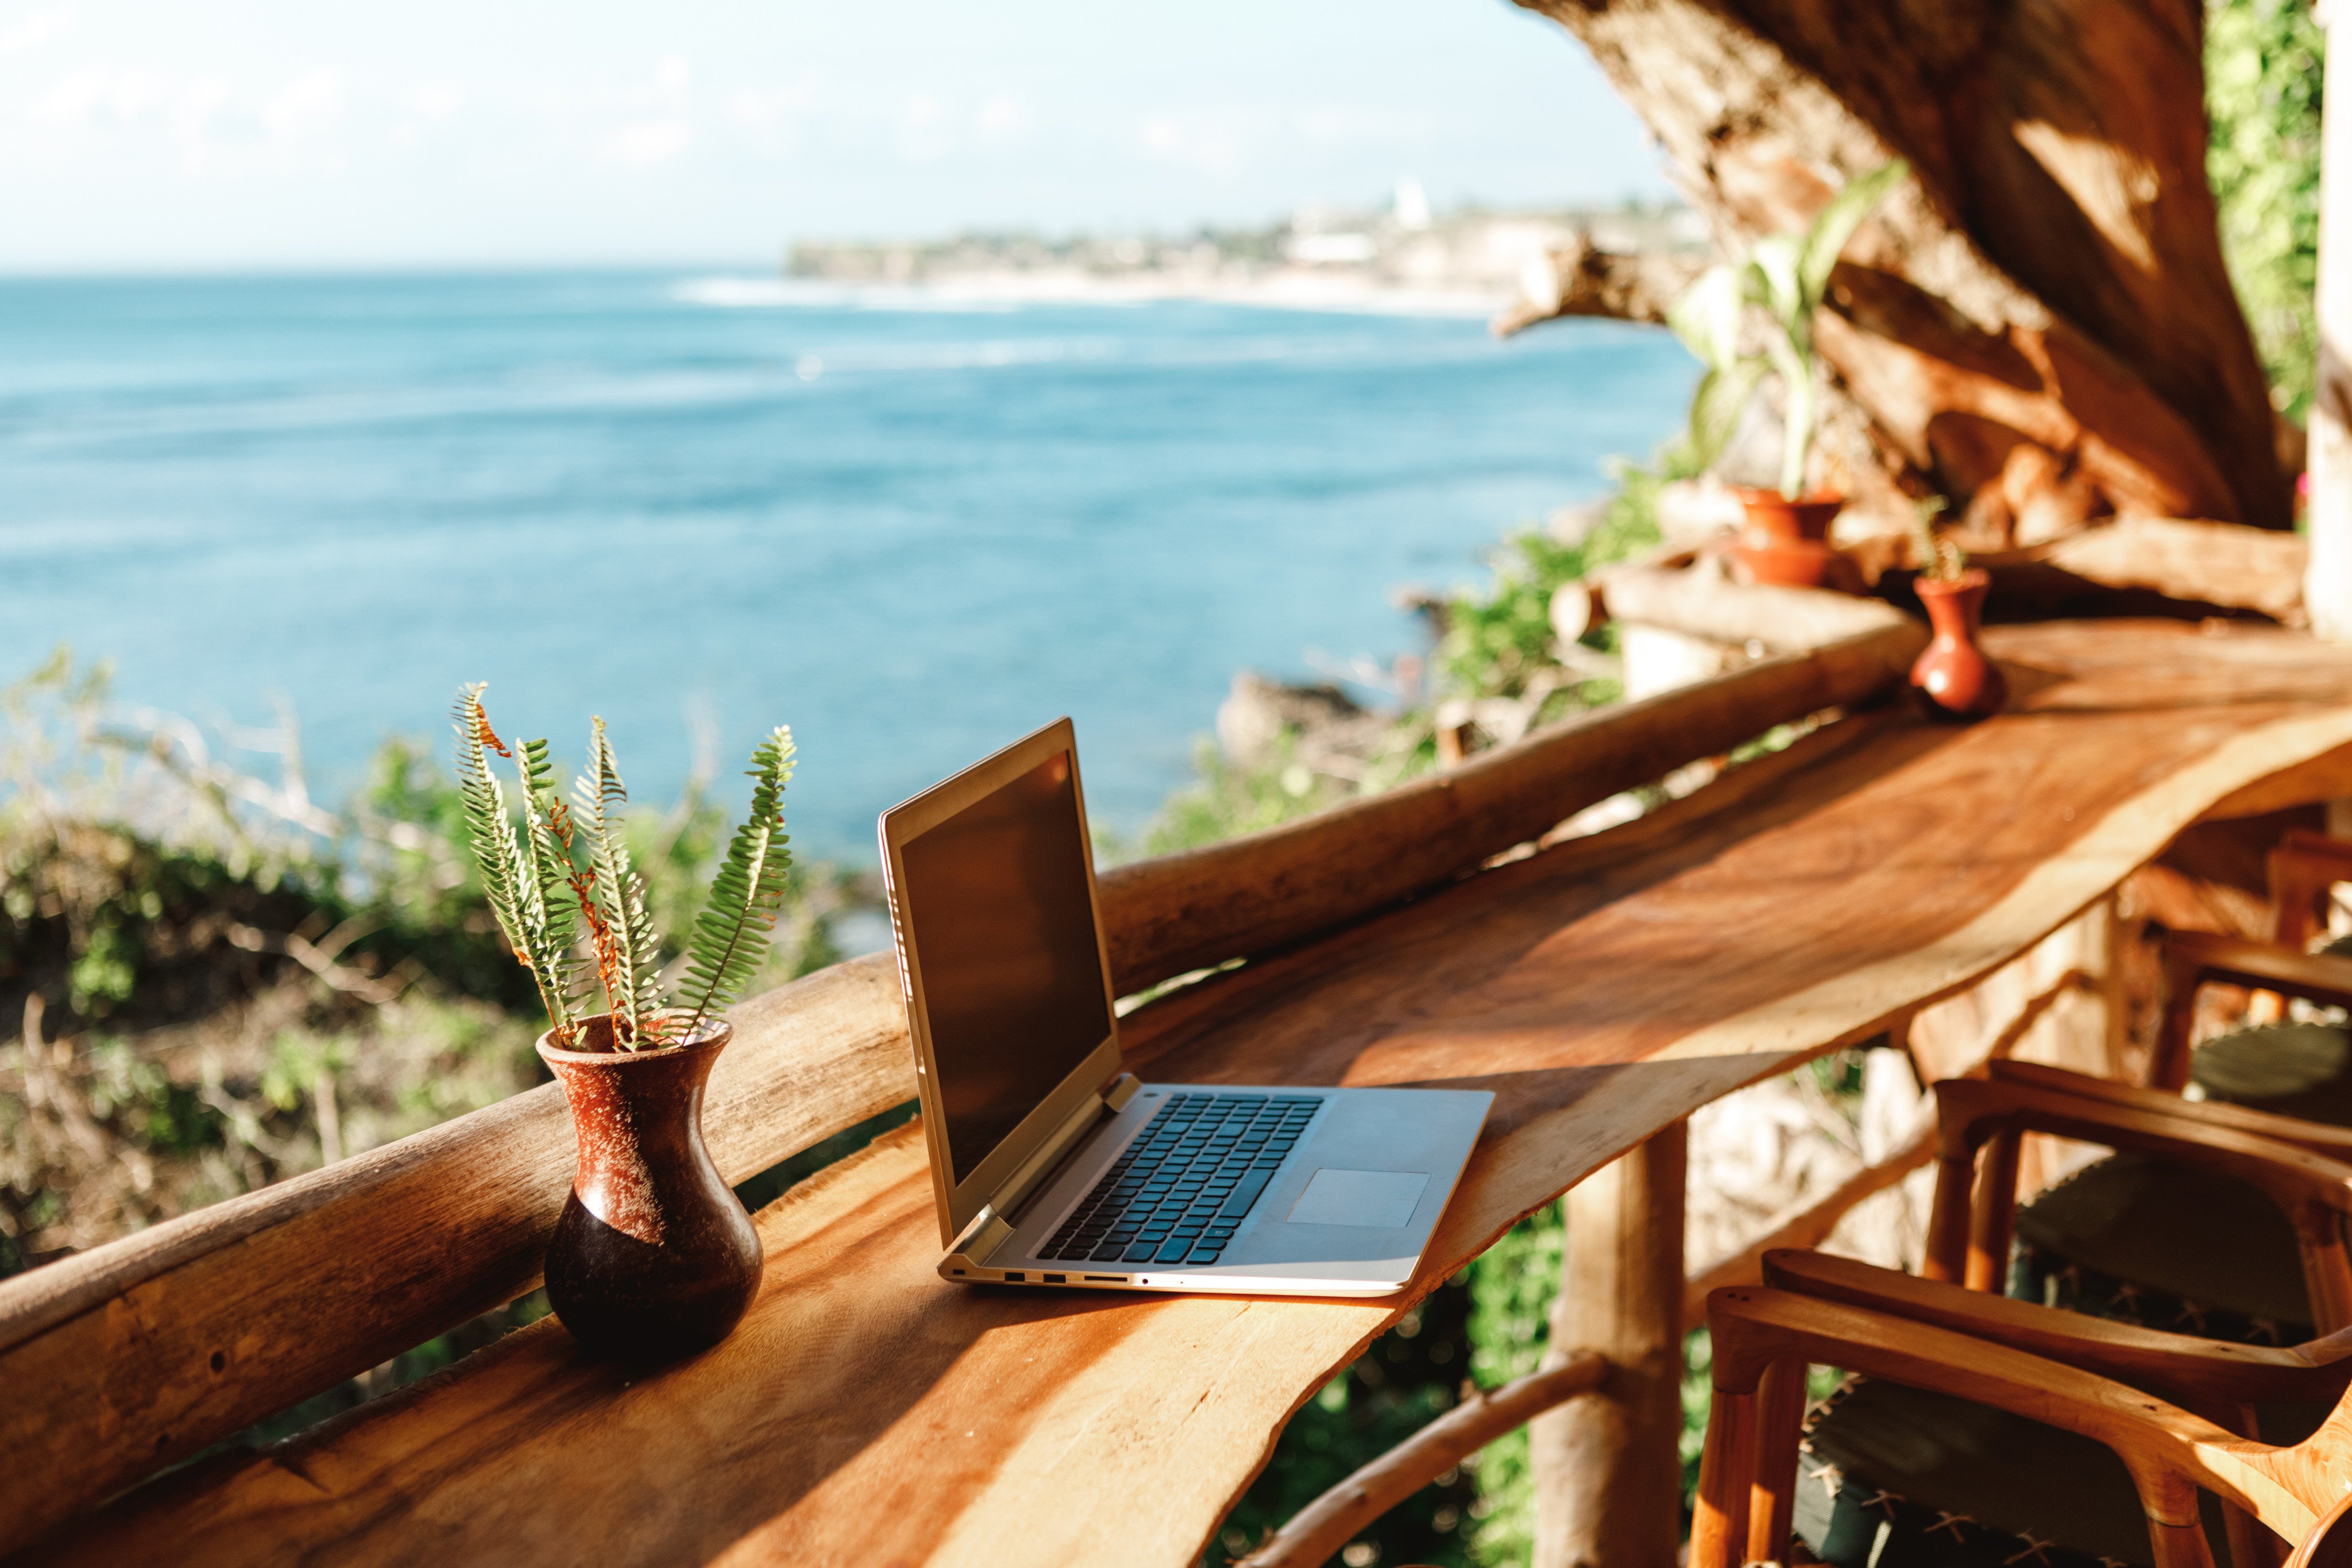 What’s going on with Bali’s long-awaited digital nomad visa? Indonesia’s tourism minister doesn’t seem to know. Photo: Shutterstock